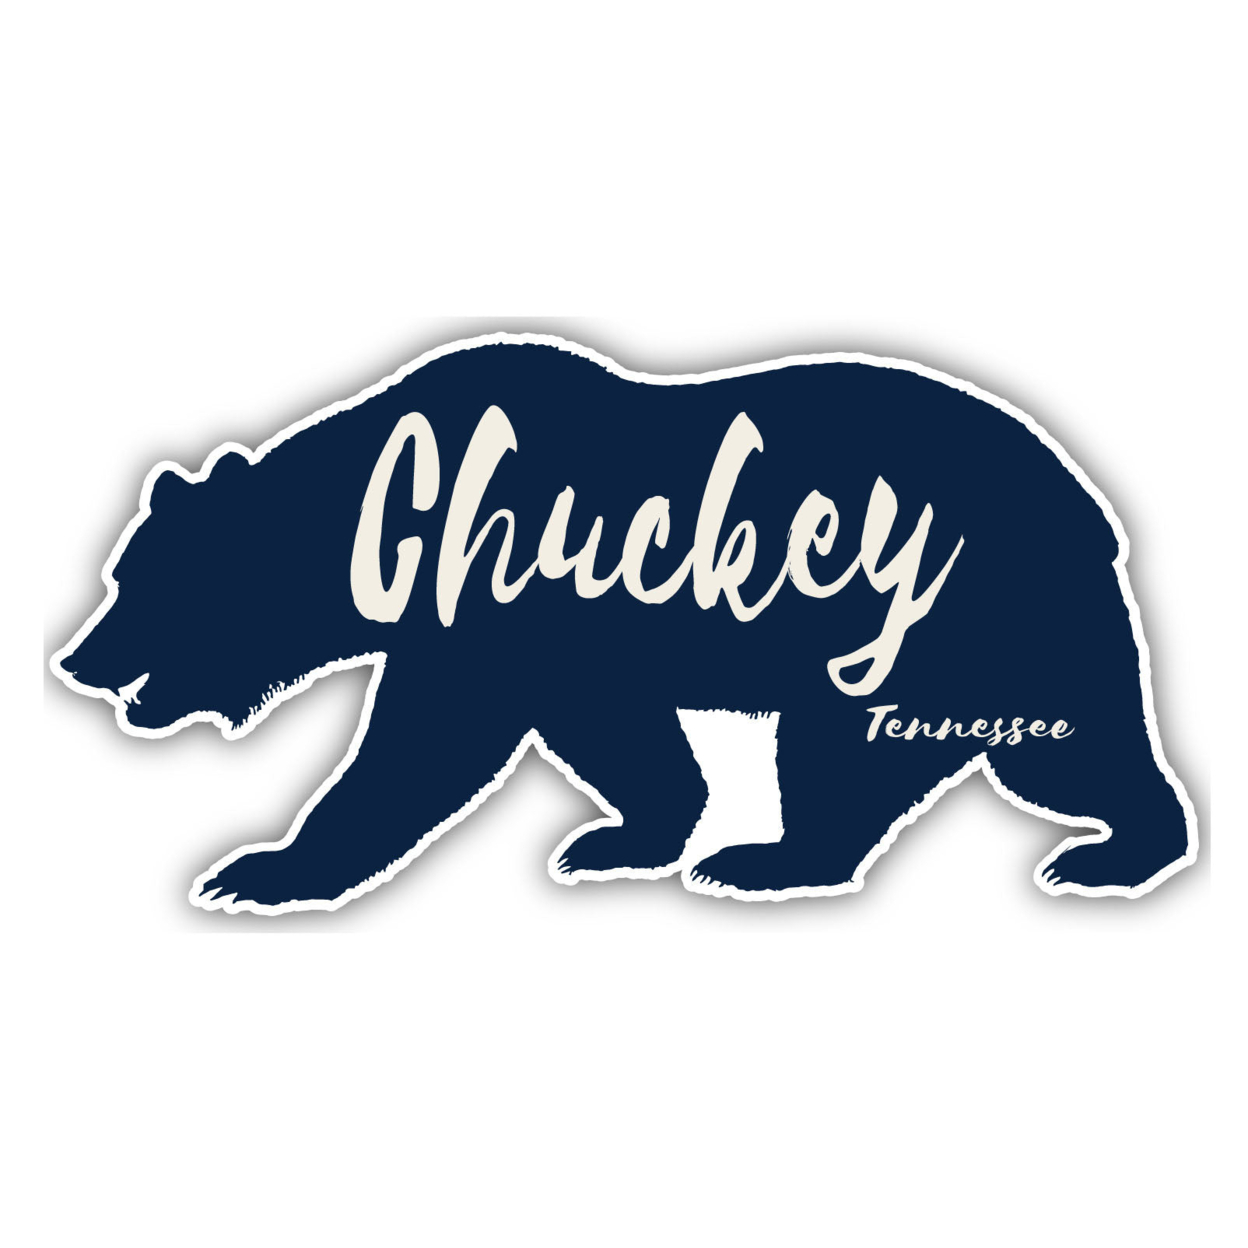 Chuckey Tennessee Souvenir Decorative Stickers (Choose Theme And Size) - Single Unit, 12-Inch, Bear